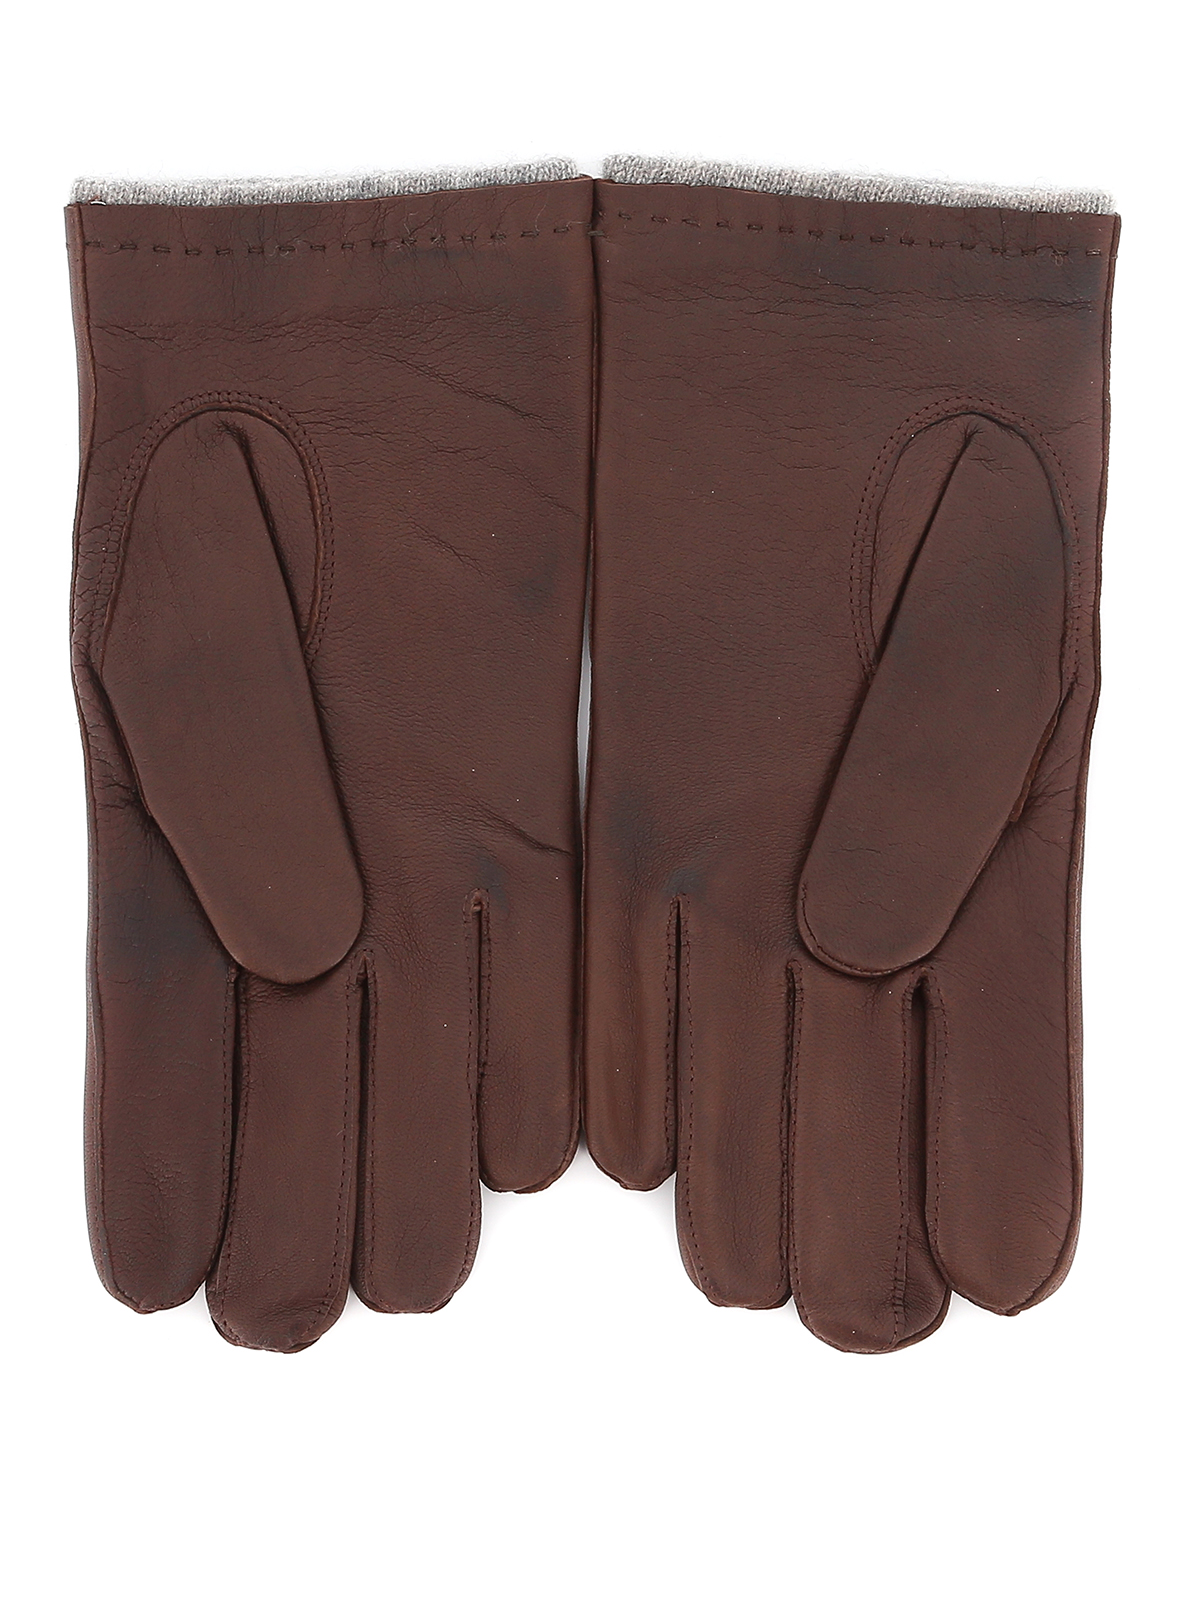 Shop Orciani Nappa Wrinkled Brown Gloves